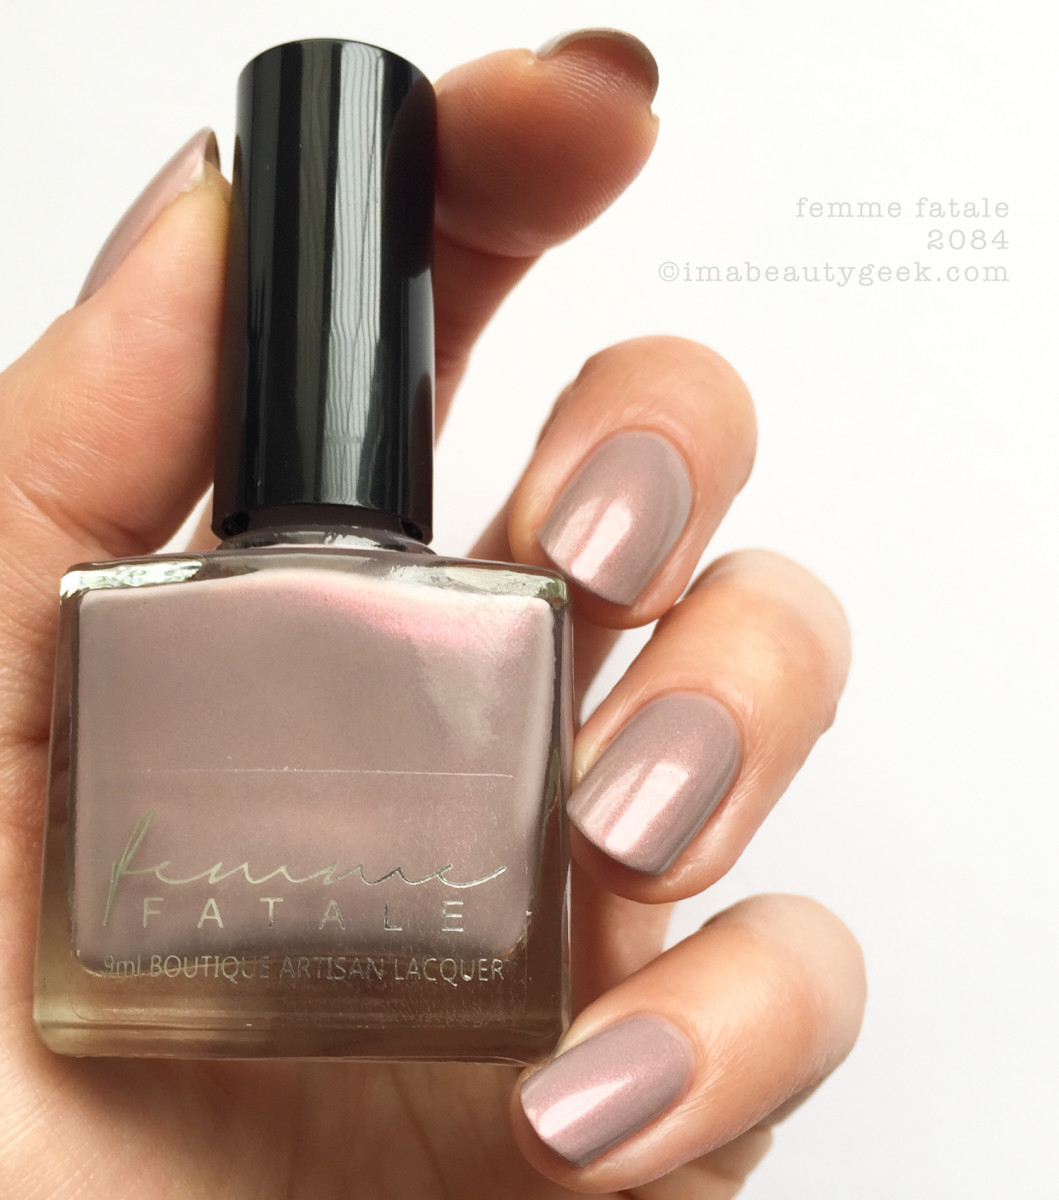 Femme Fatale 2084 Swatches Review